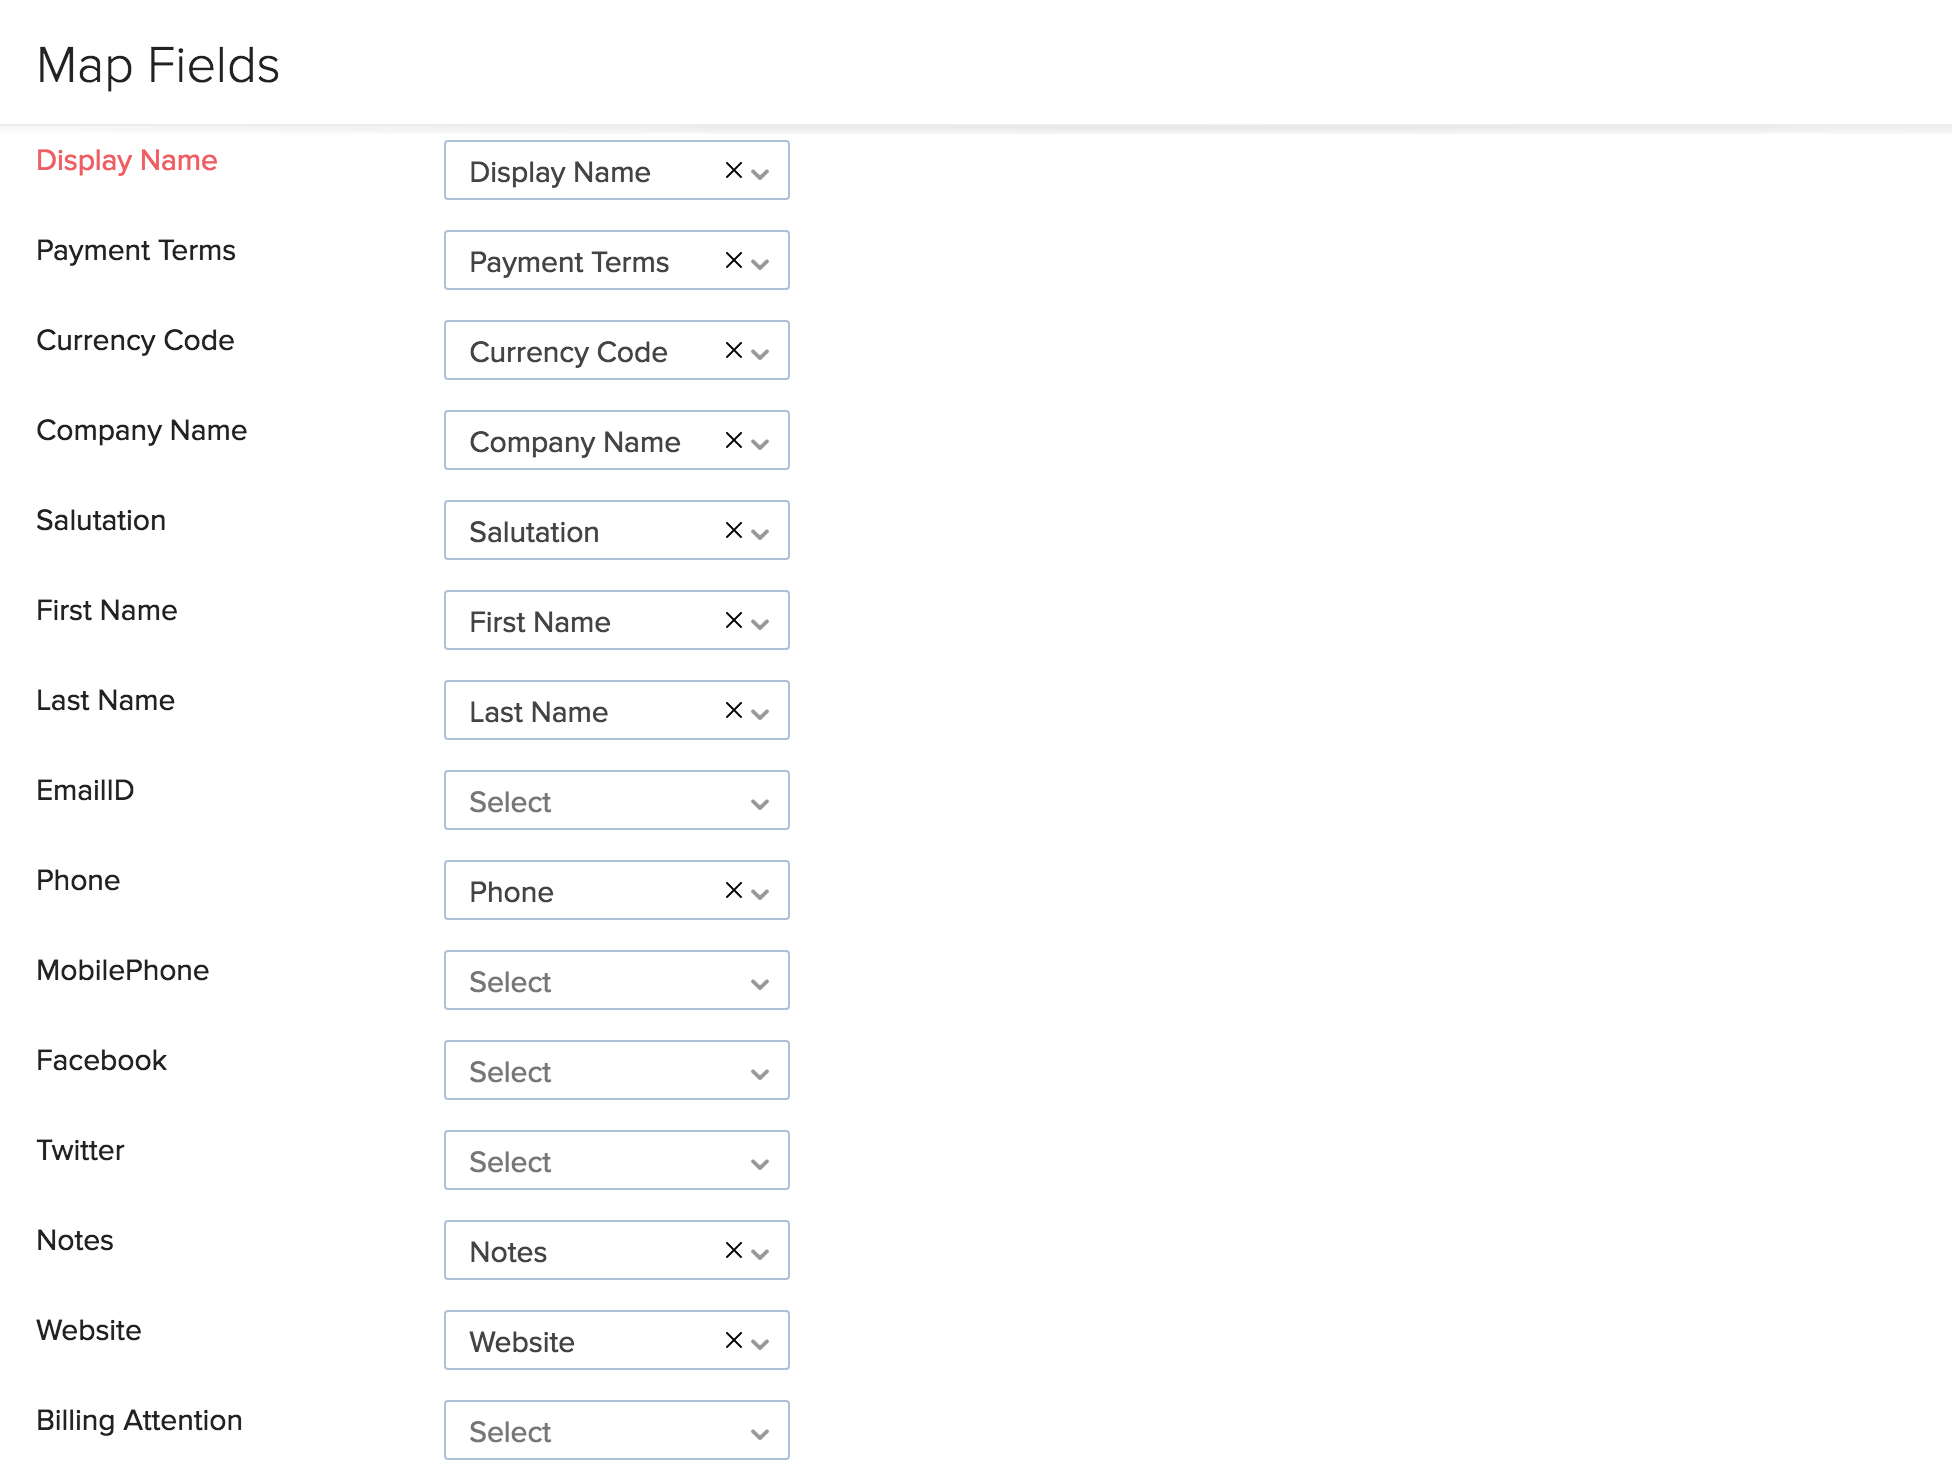 a sample mapping fields page